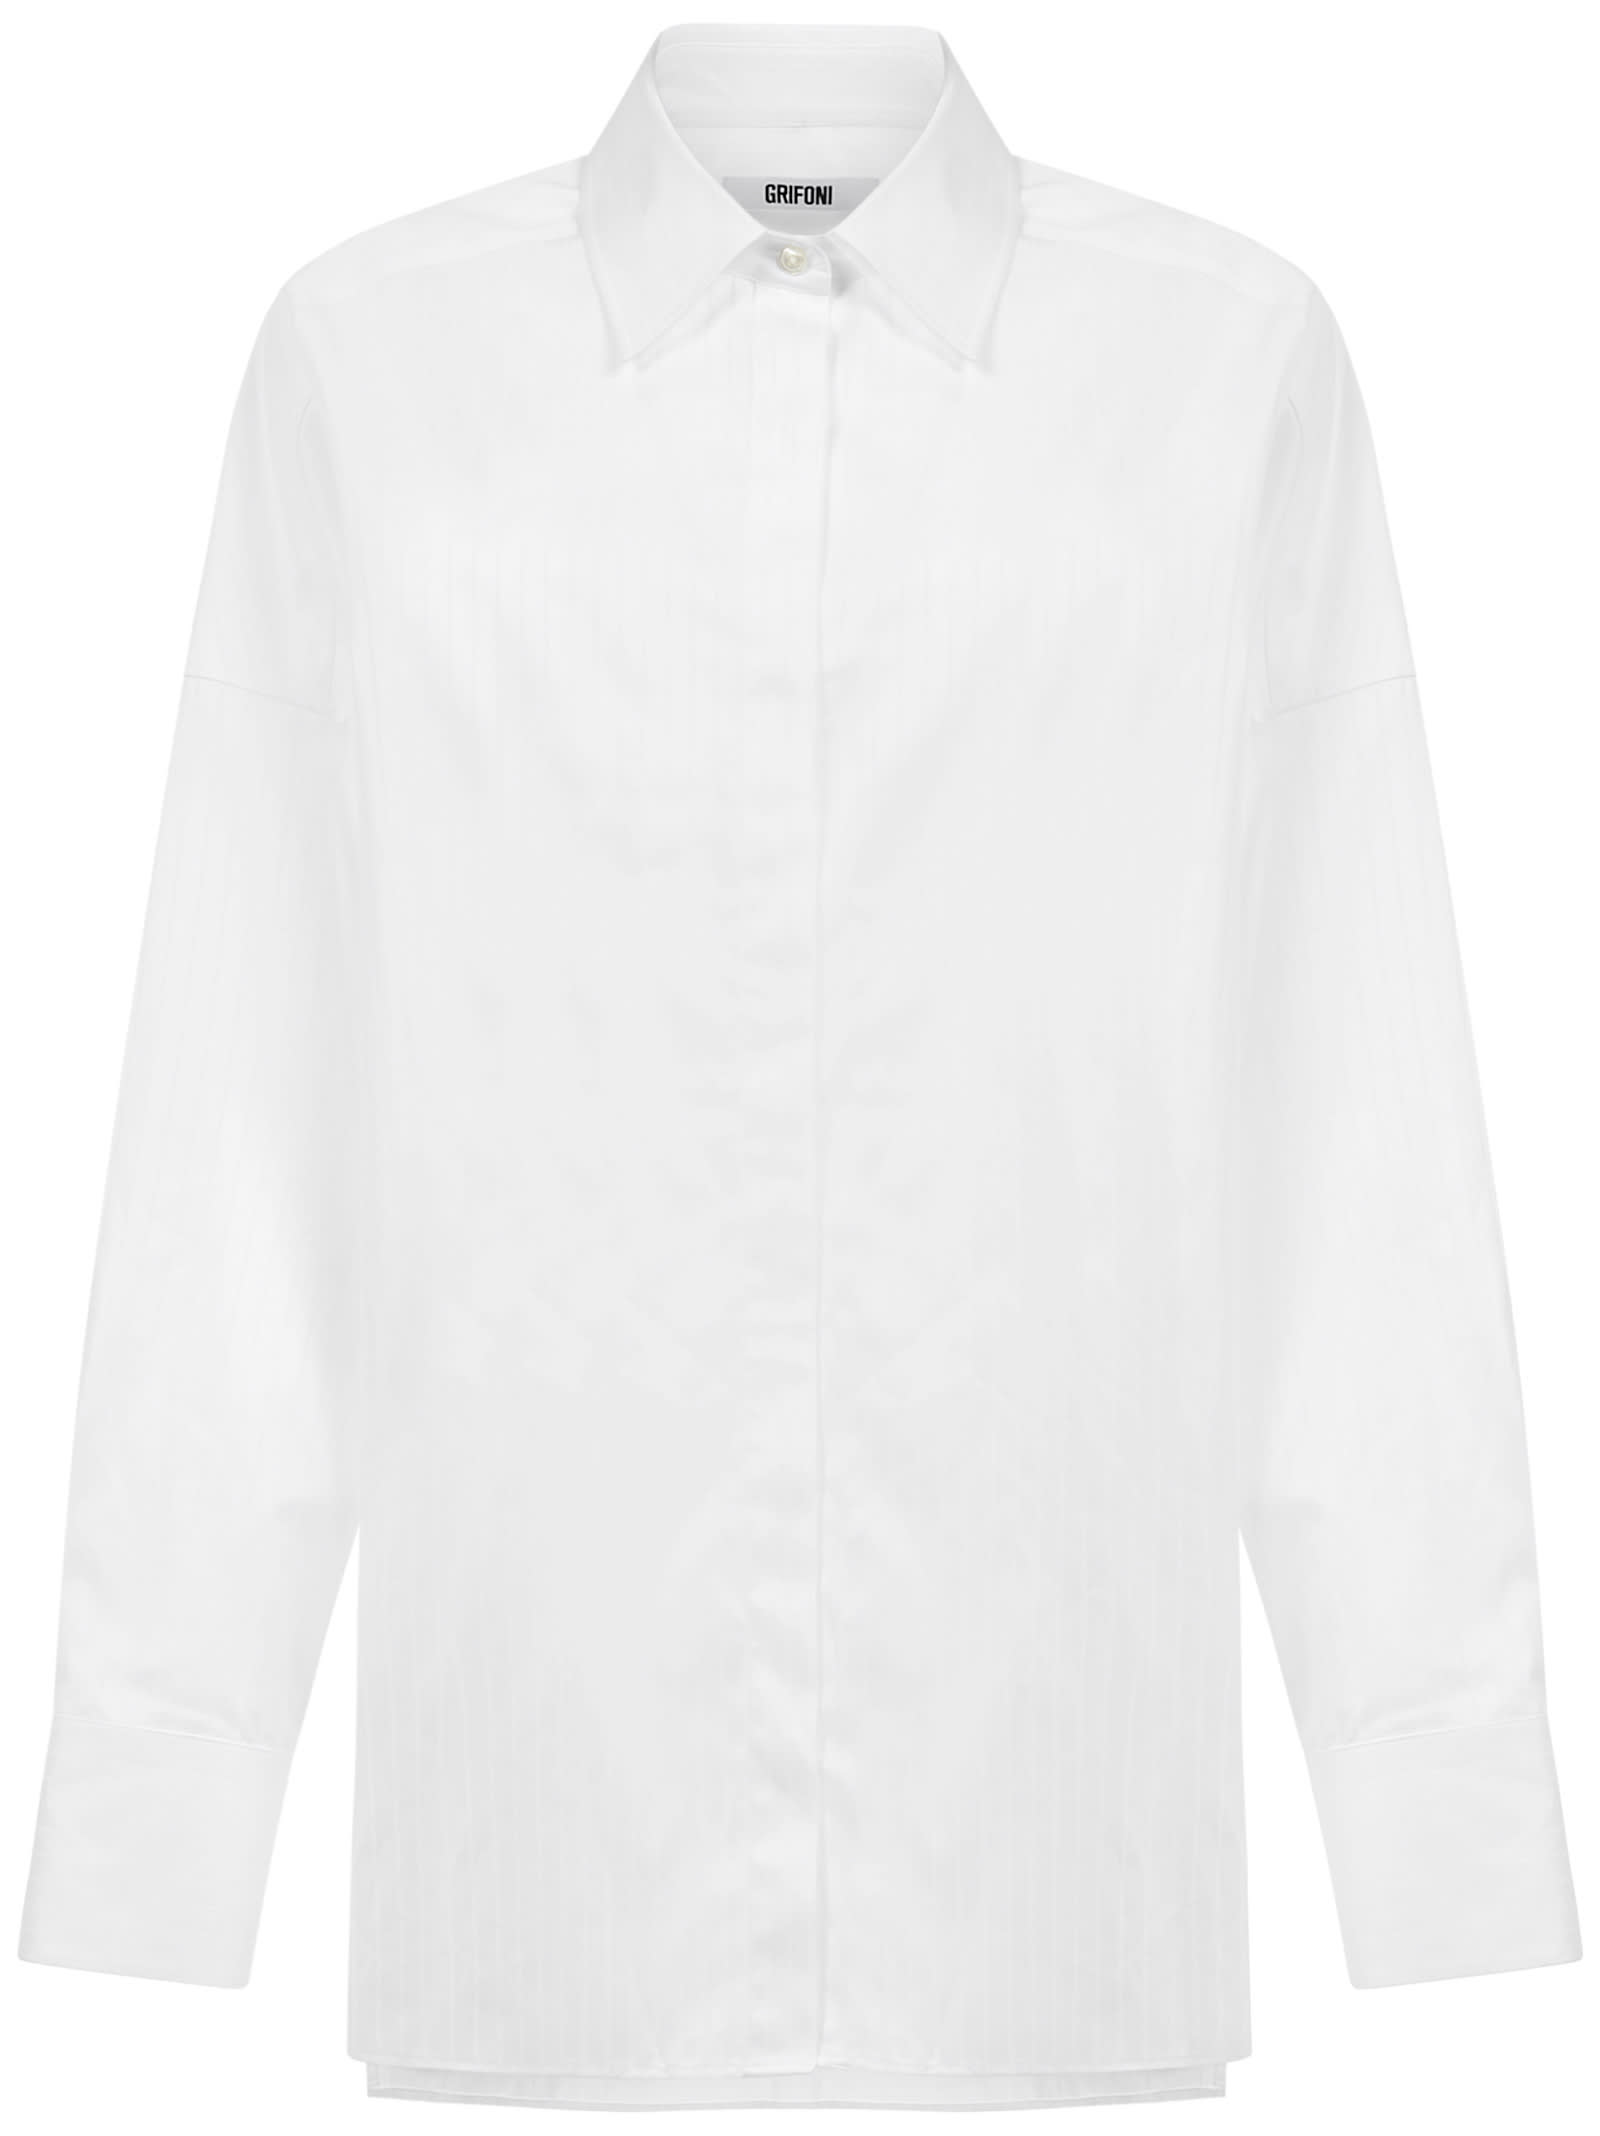 Mauro Grifoni Grifoni Shirt In White